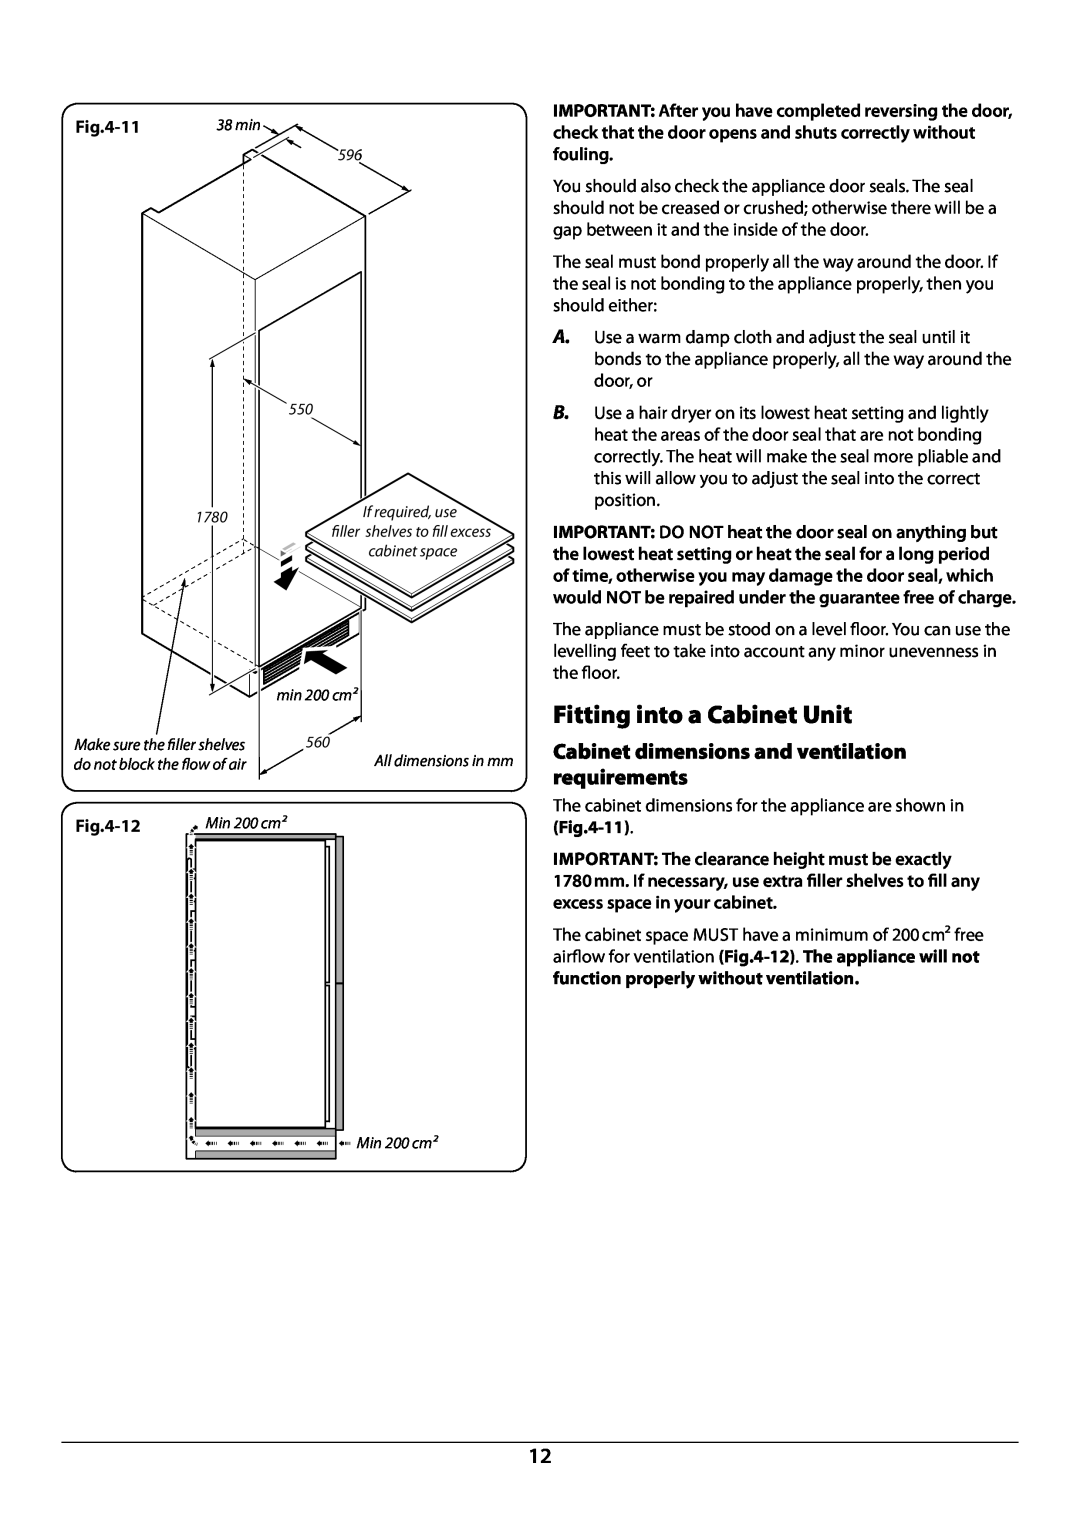 Rangemaster U110121 - 01A manual Fitting into a cabinet unit, cabinet dimensions and ventilation requirements 